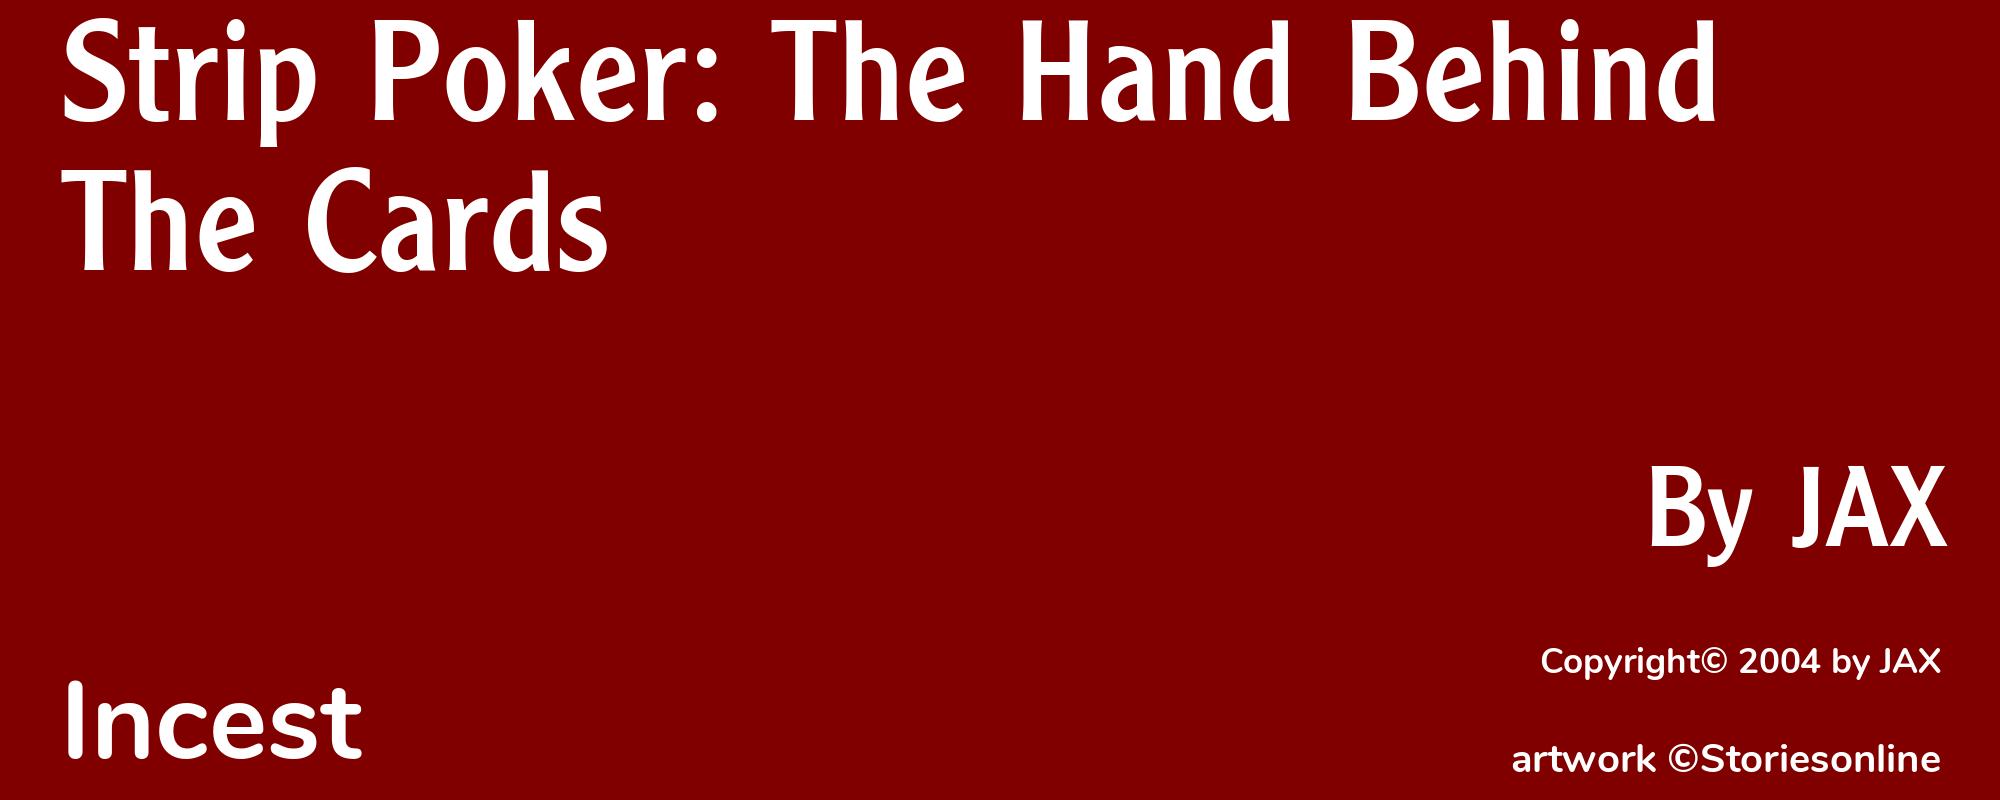 Strip Poker: The Hand Behind The Cards - Cover